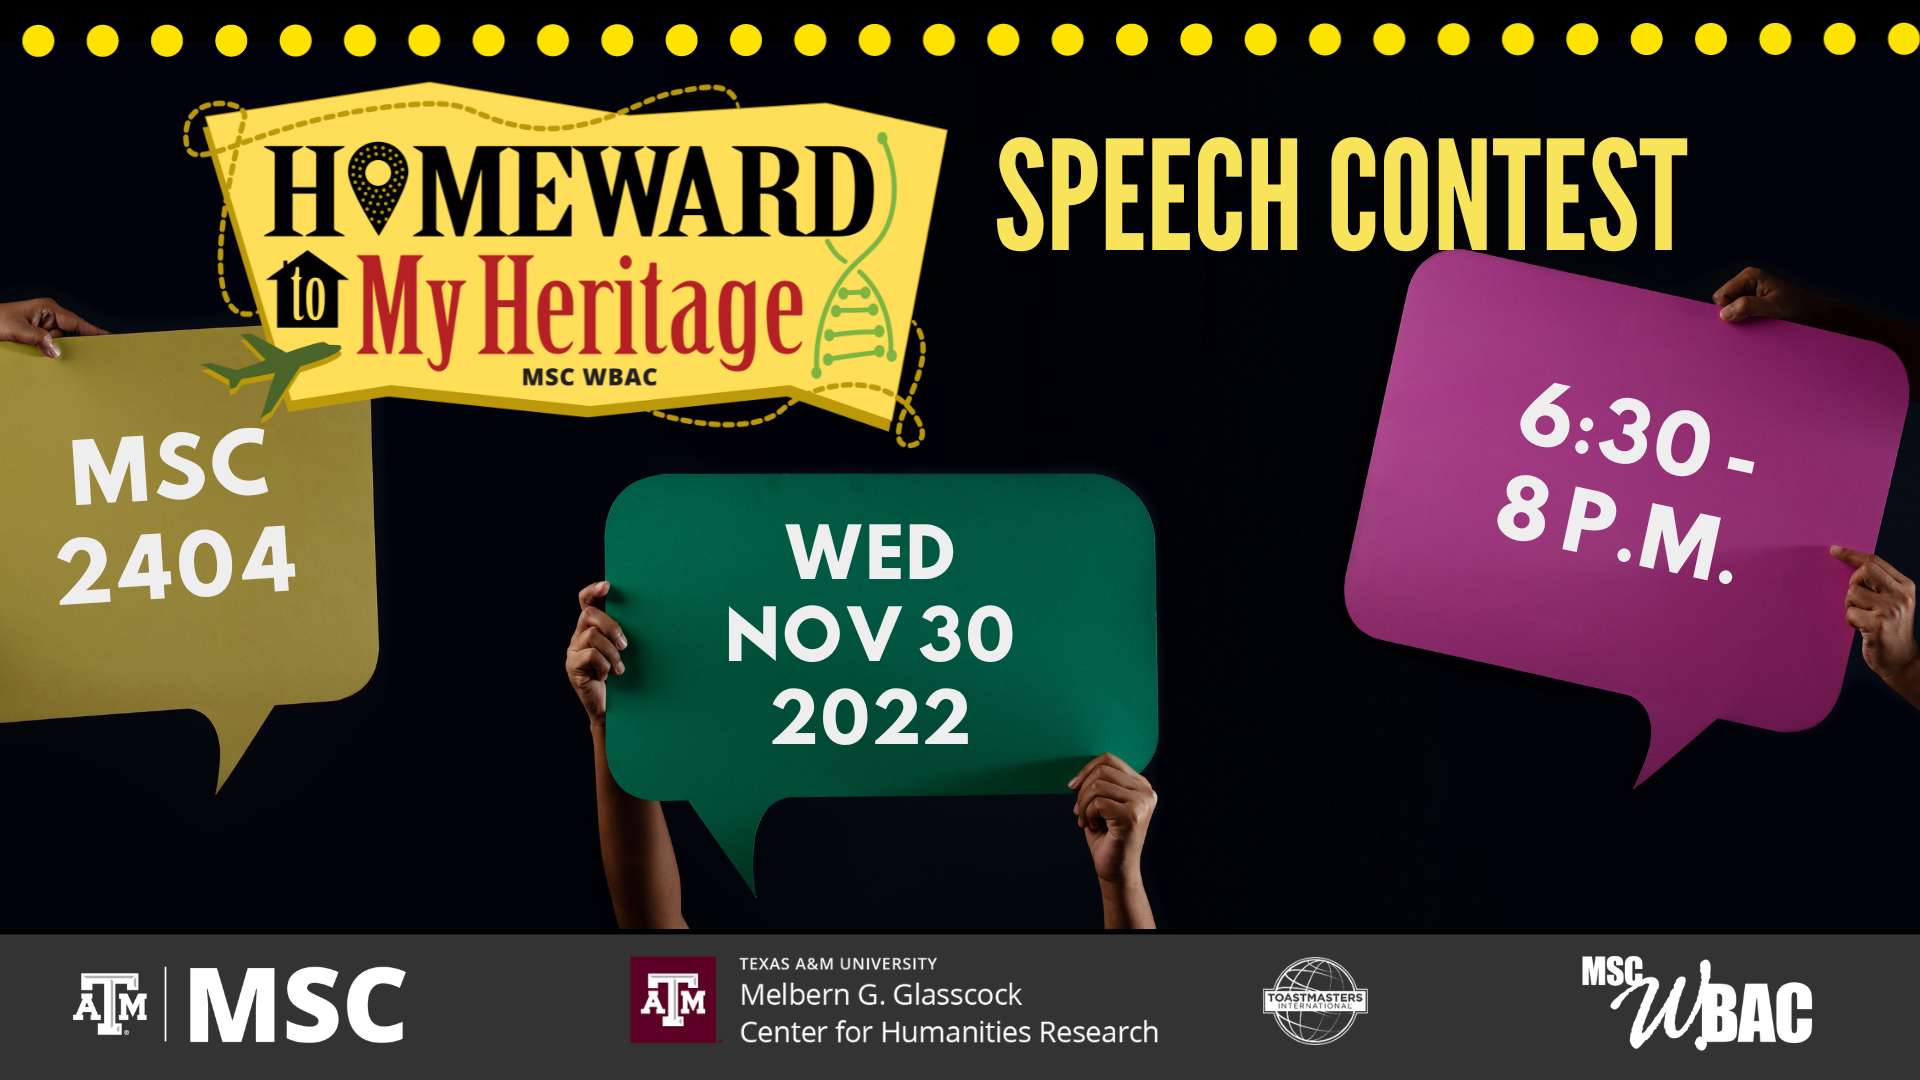 MSC WBAC, Melbern G. Glasscock Center for Humanities Research and Toastmasters presents Homeward to my Heritage, Speech Contest, Wednesday, November 30, 2022 from 6:30 to 8 p.m. at MSC 2404